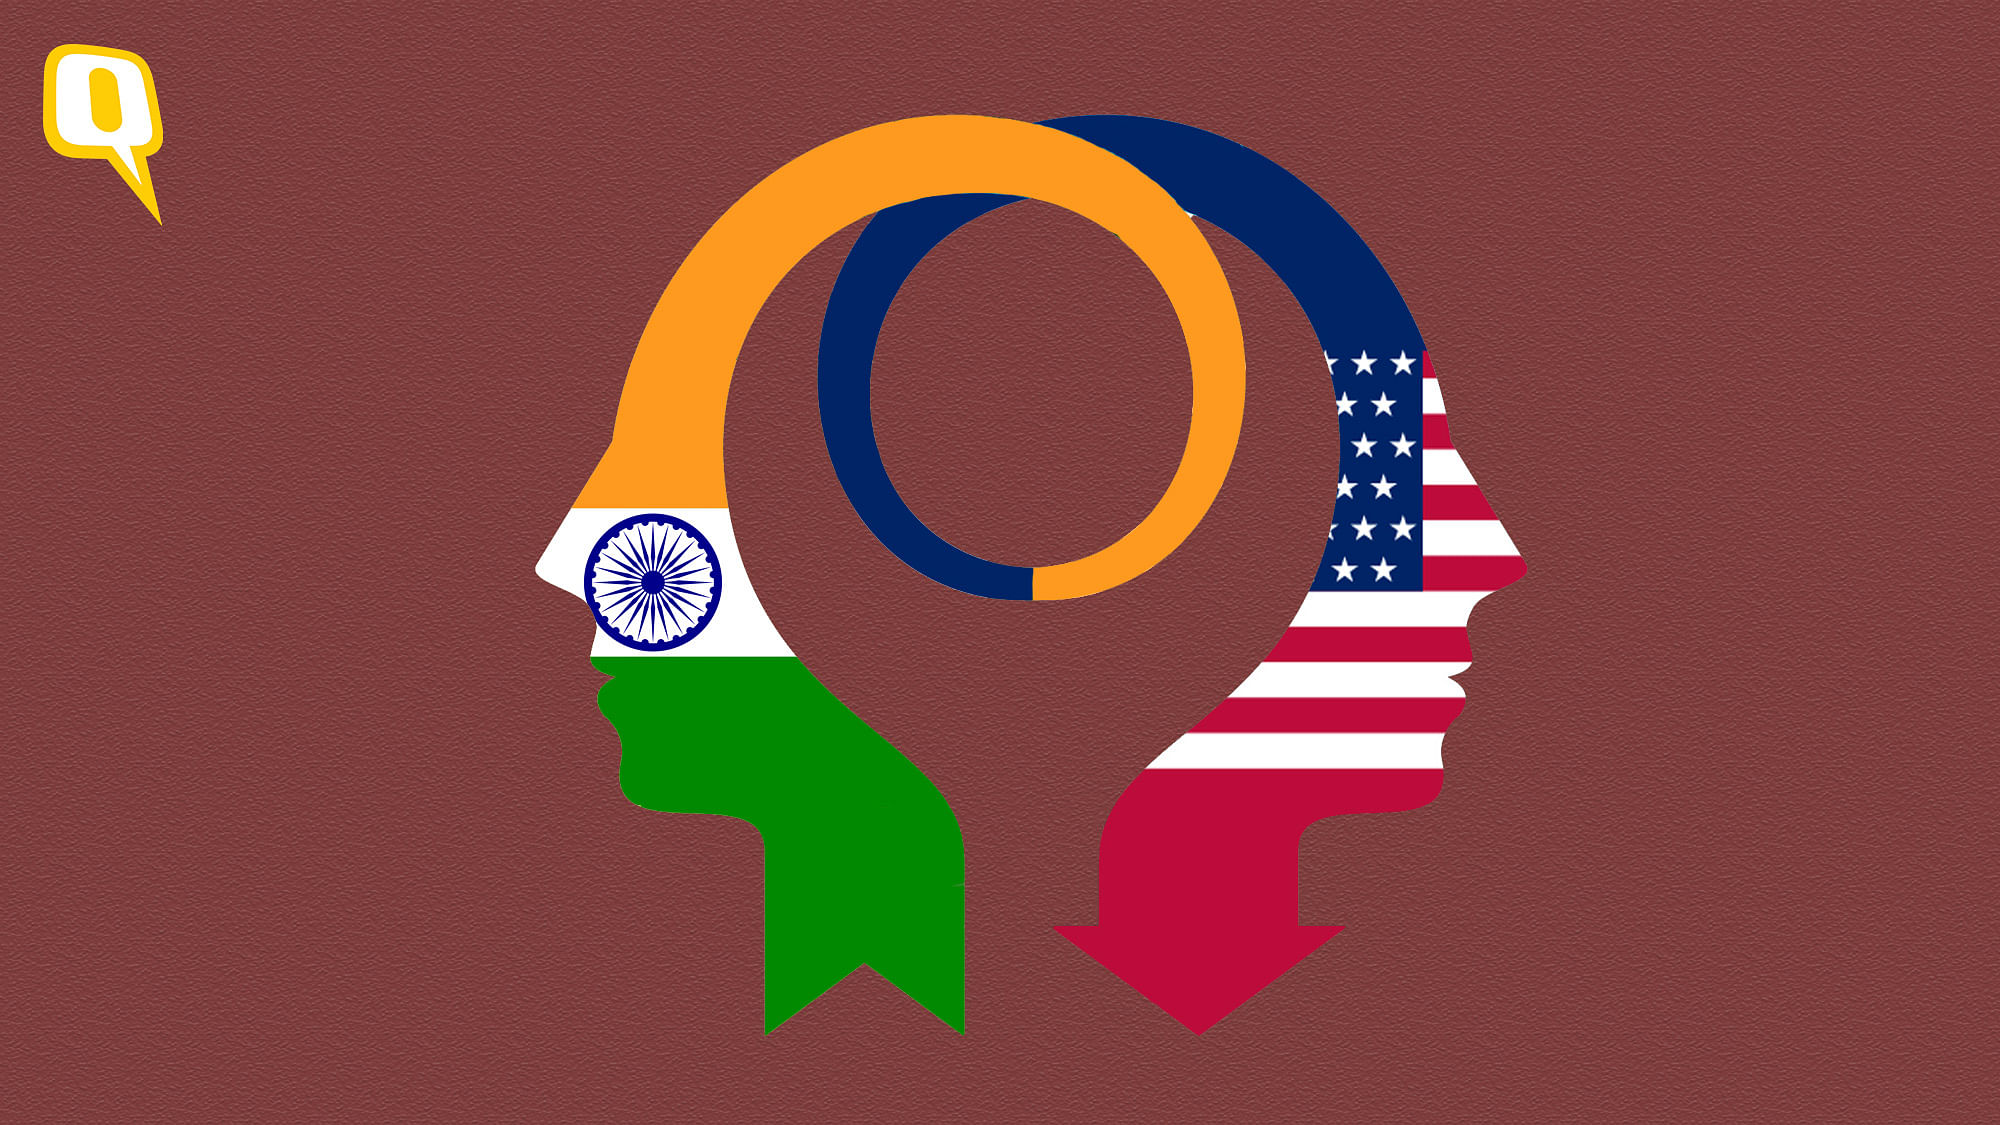 Artistic impressions of Indian and American flags used for representational purposes.